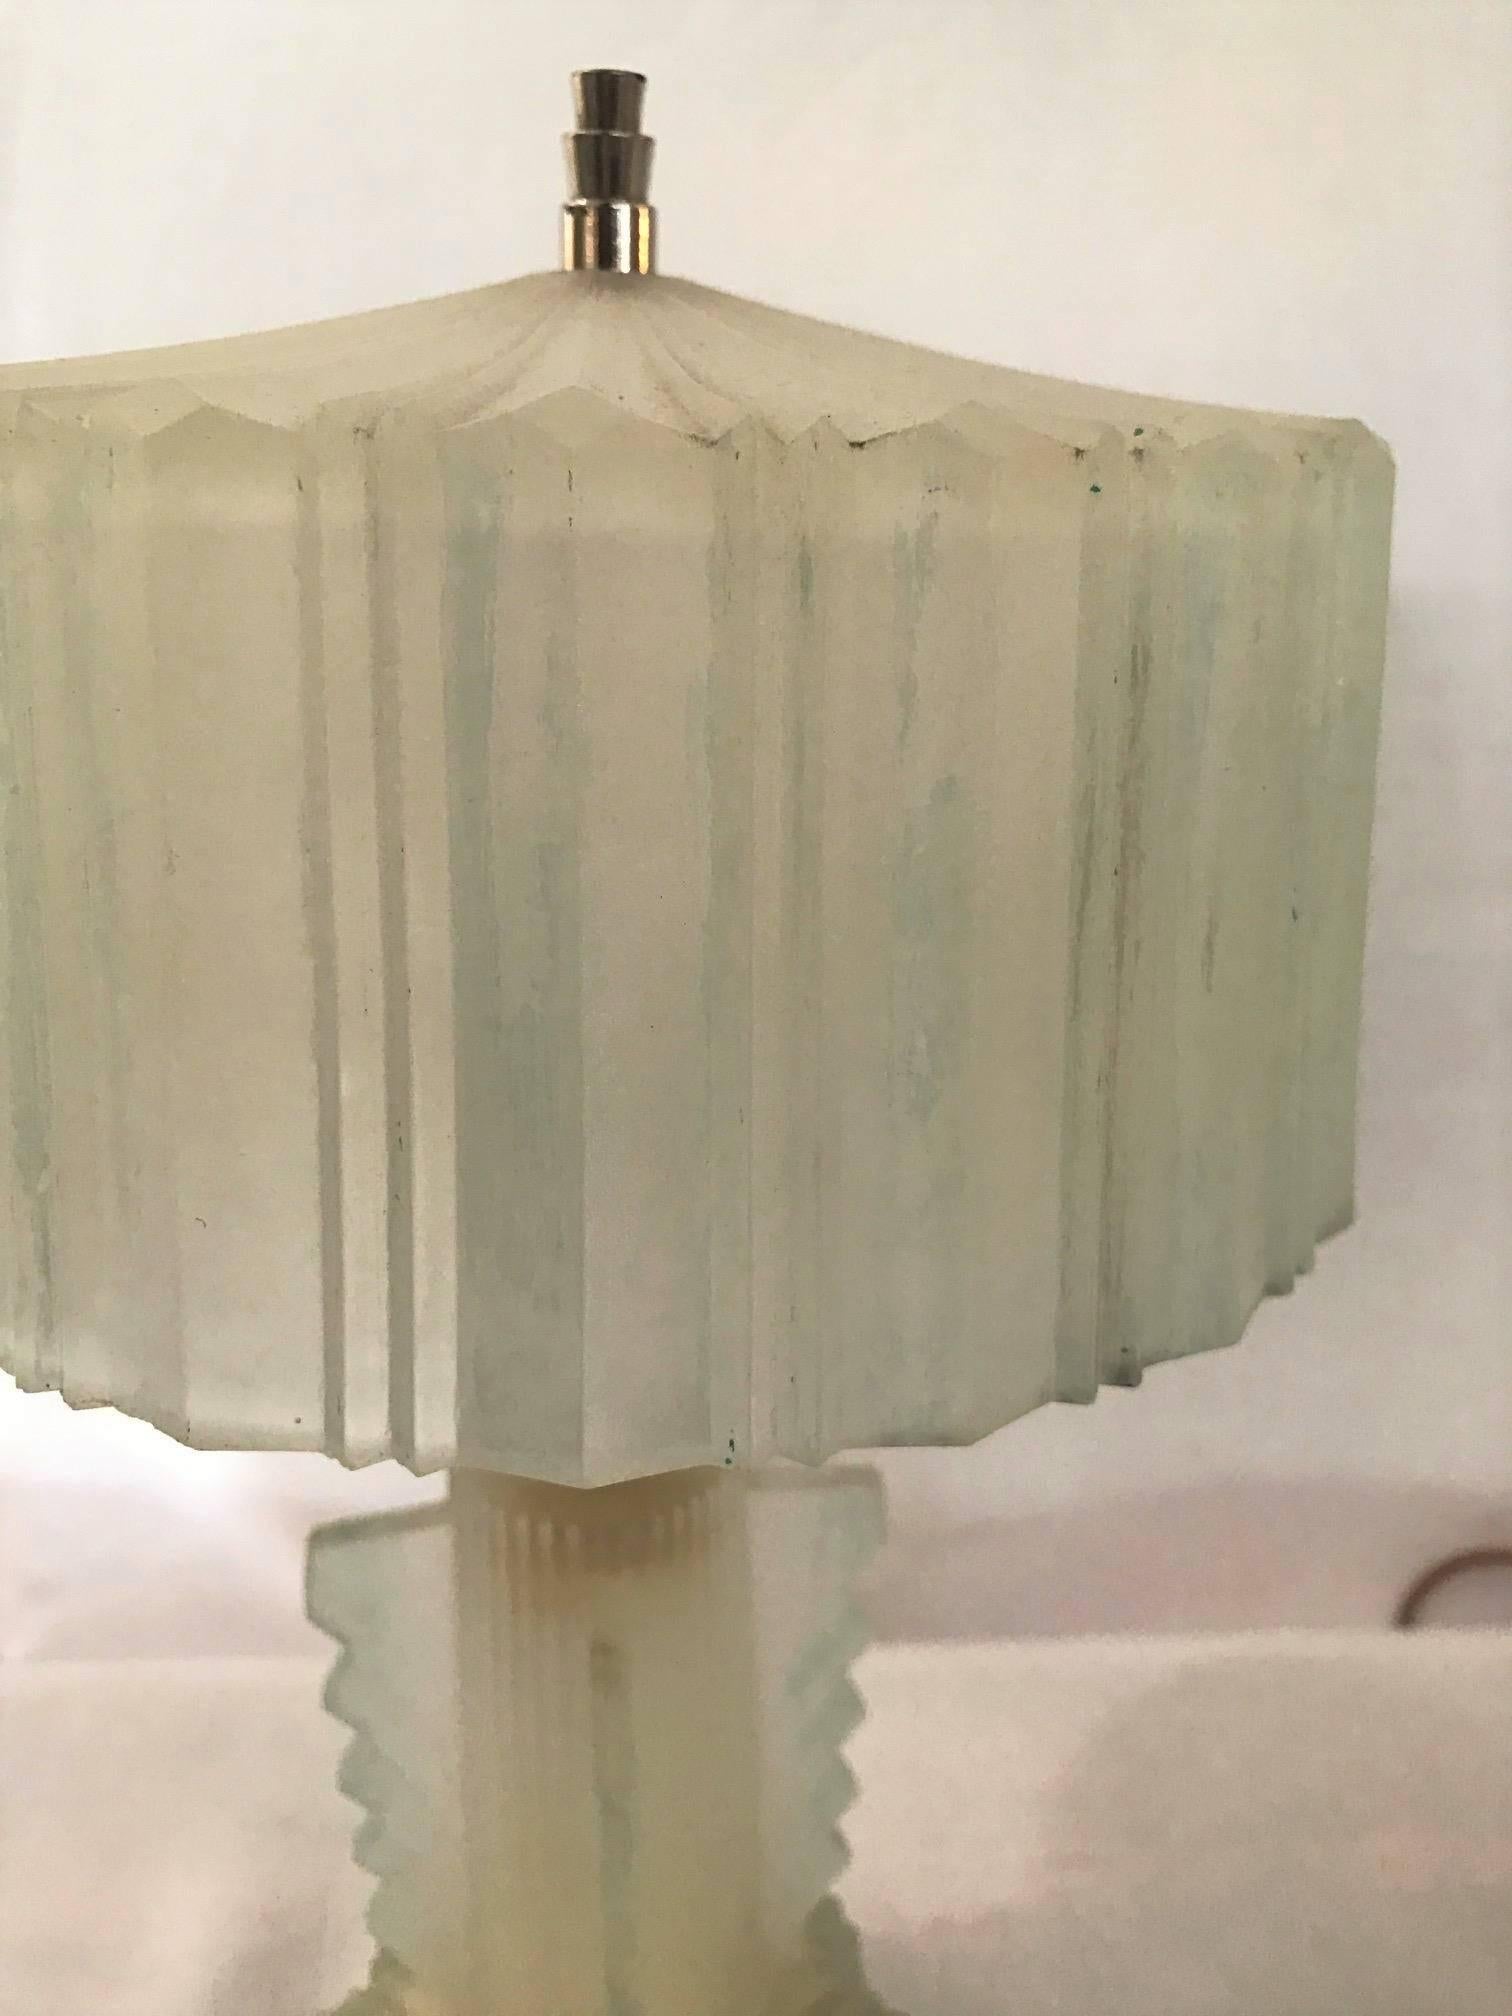 French SALE! SALE! SALE! A Pair of Art Deco Lalique Style Glass Lamps Nickle Finials 